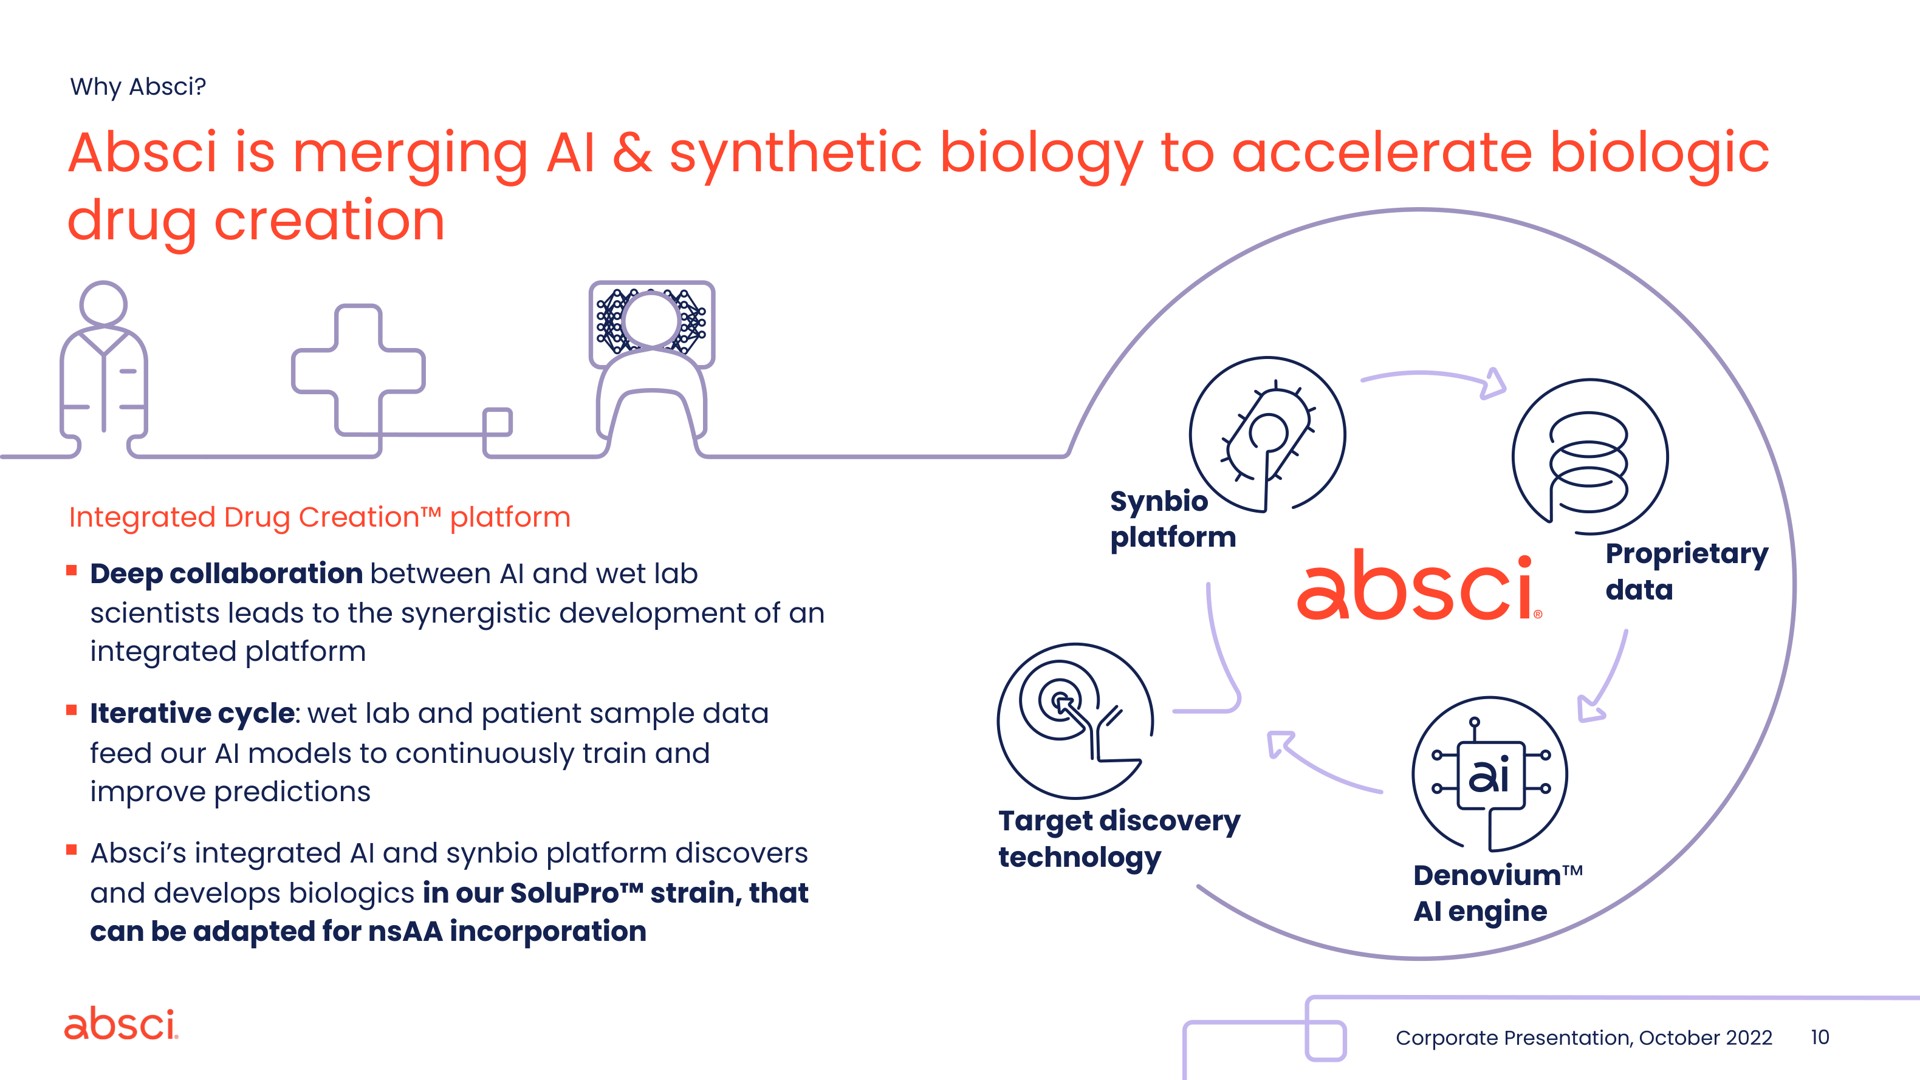 is merging synthetic biology to accelerate biologic drug creation | Absci